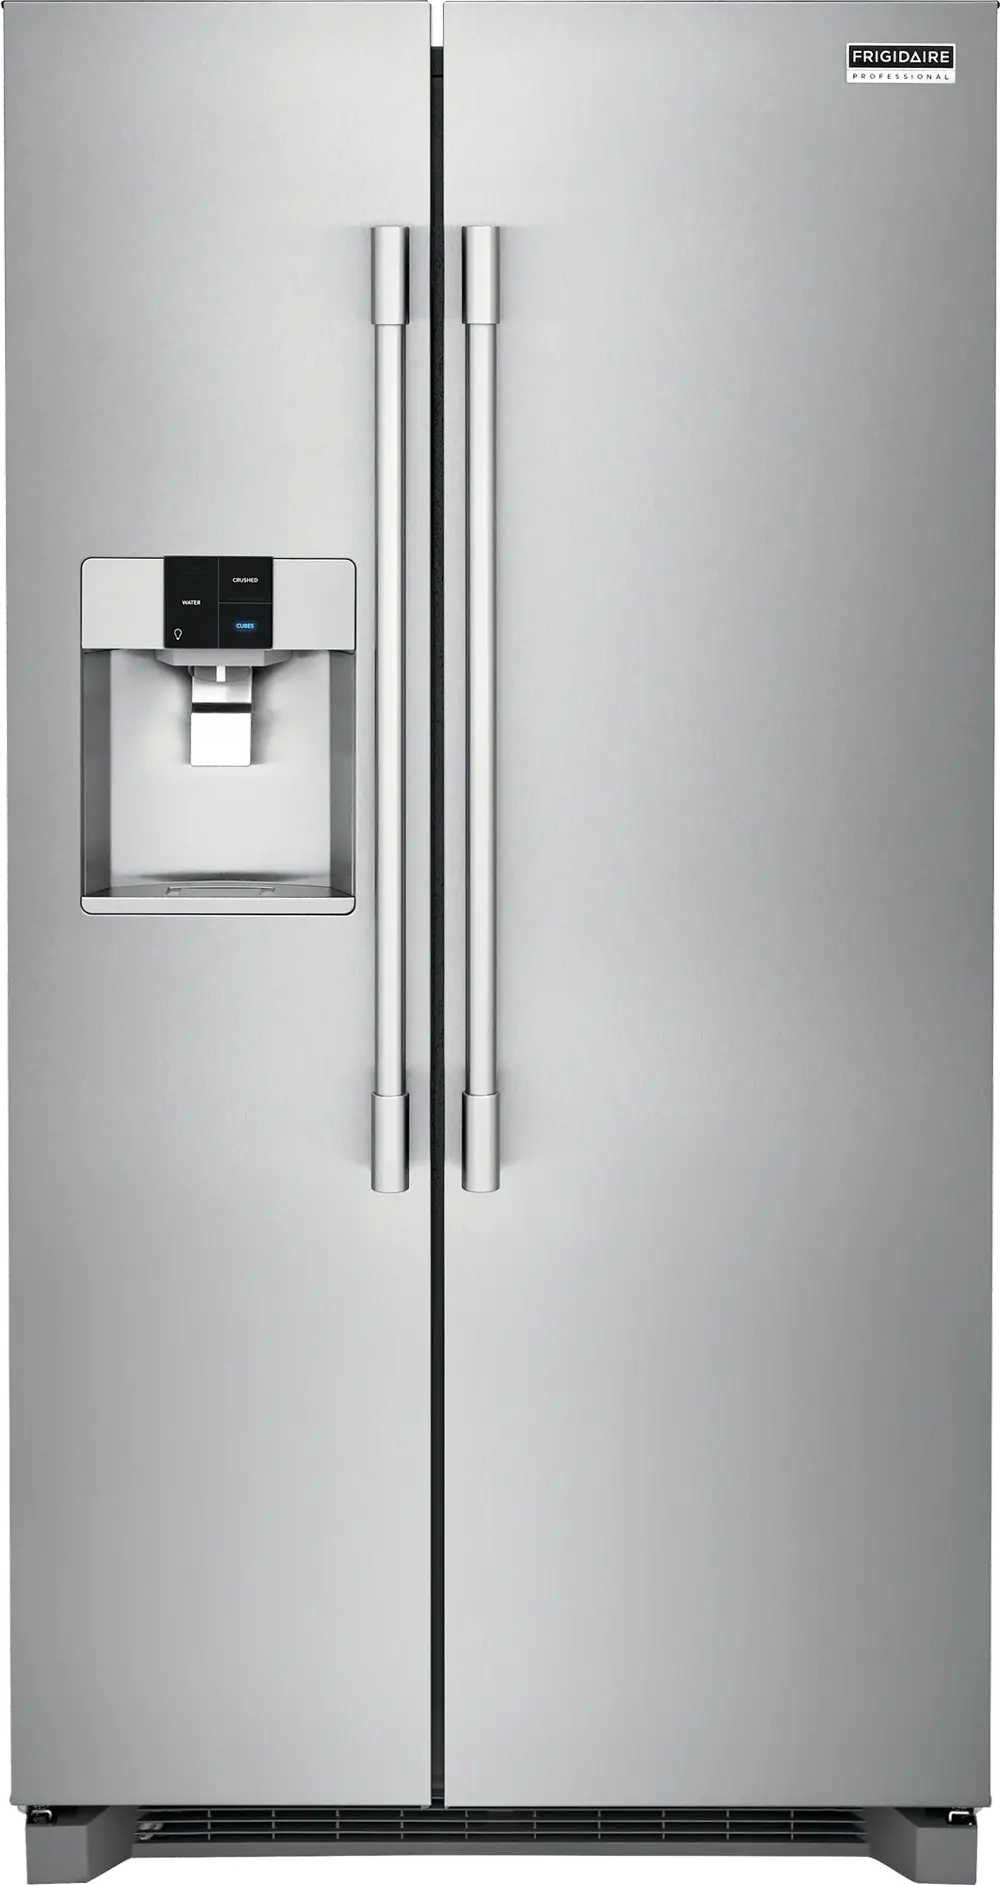 FPSC2278UF Frigidaire Professional Counter Depth Side by Side Refrigerator - 22 cu. ft., 36 Inch Stainless Steel-1